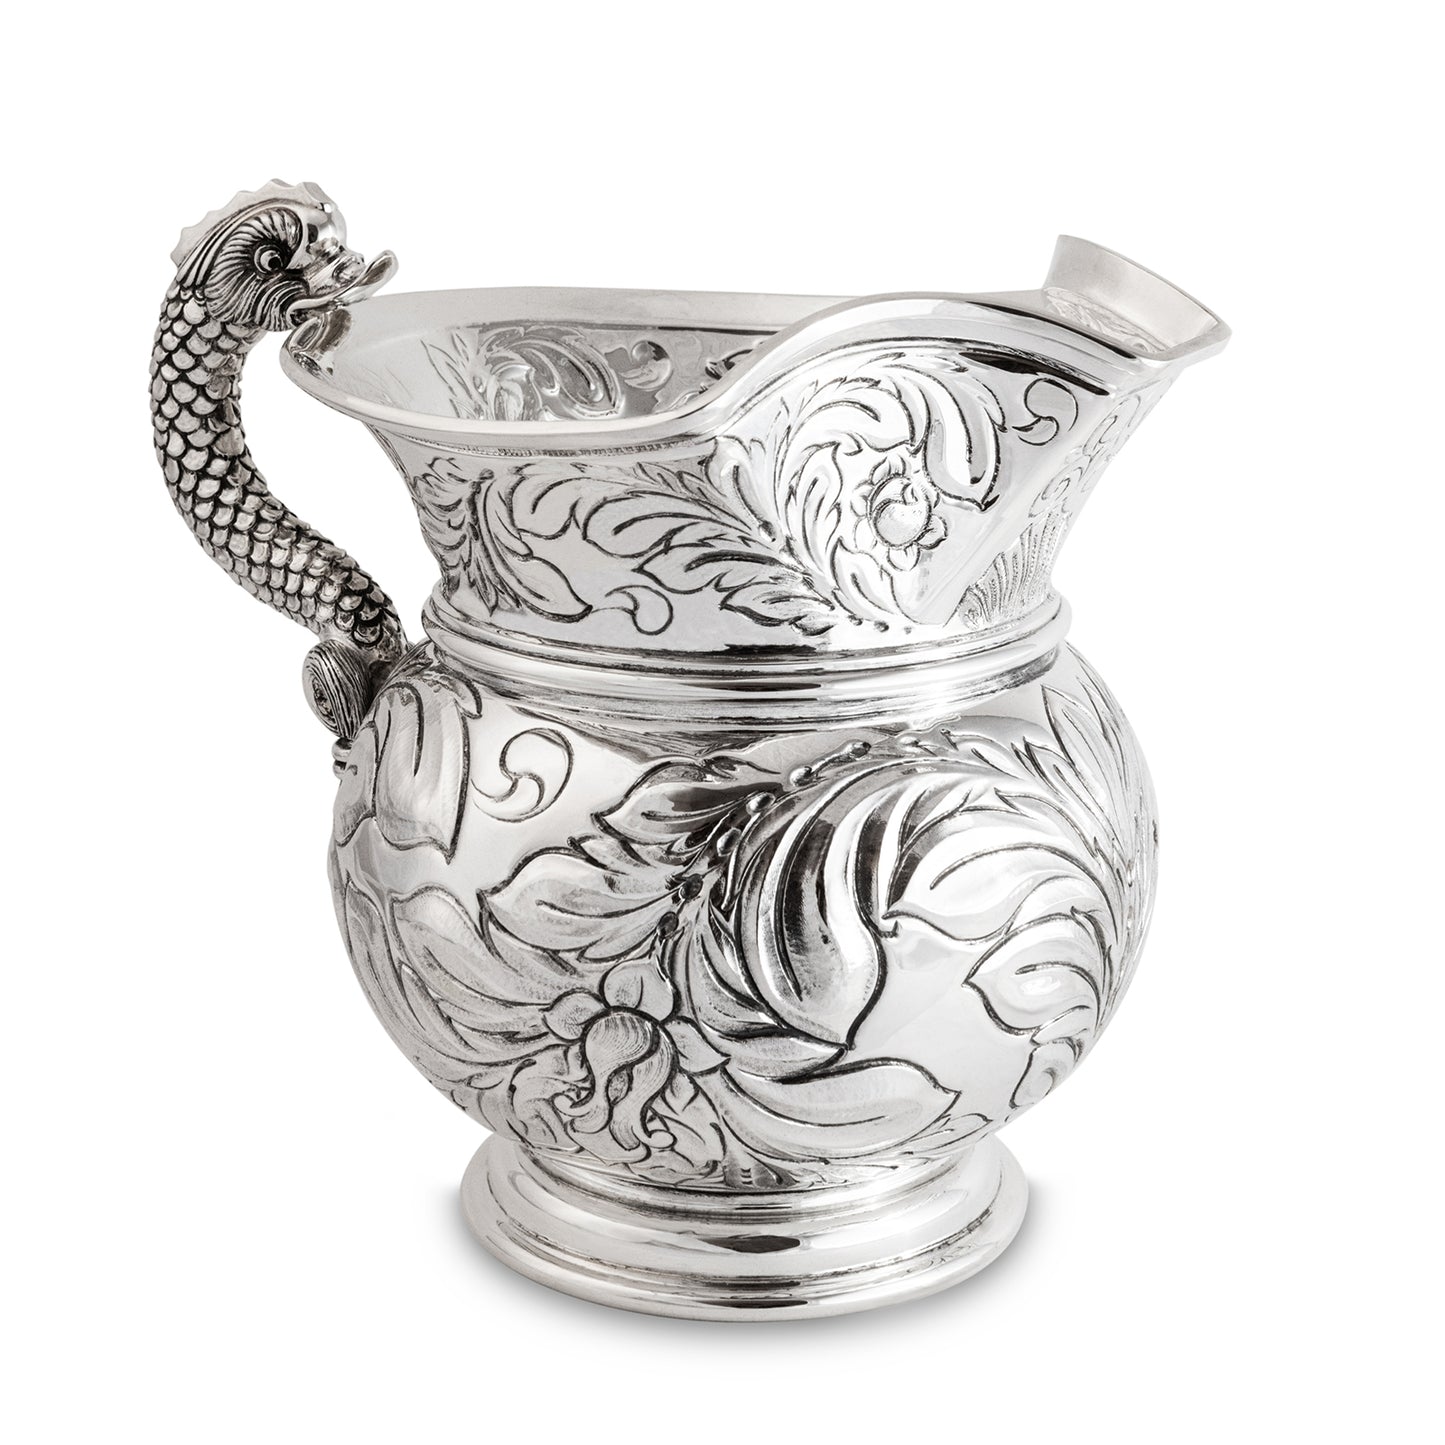 SAN MARCO 1690 PITCHER - STERLING SILVER